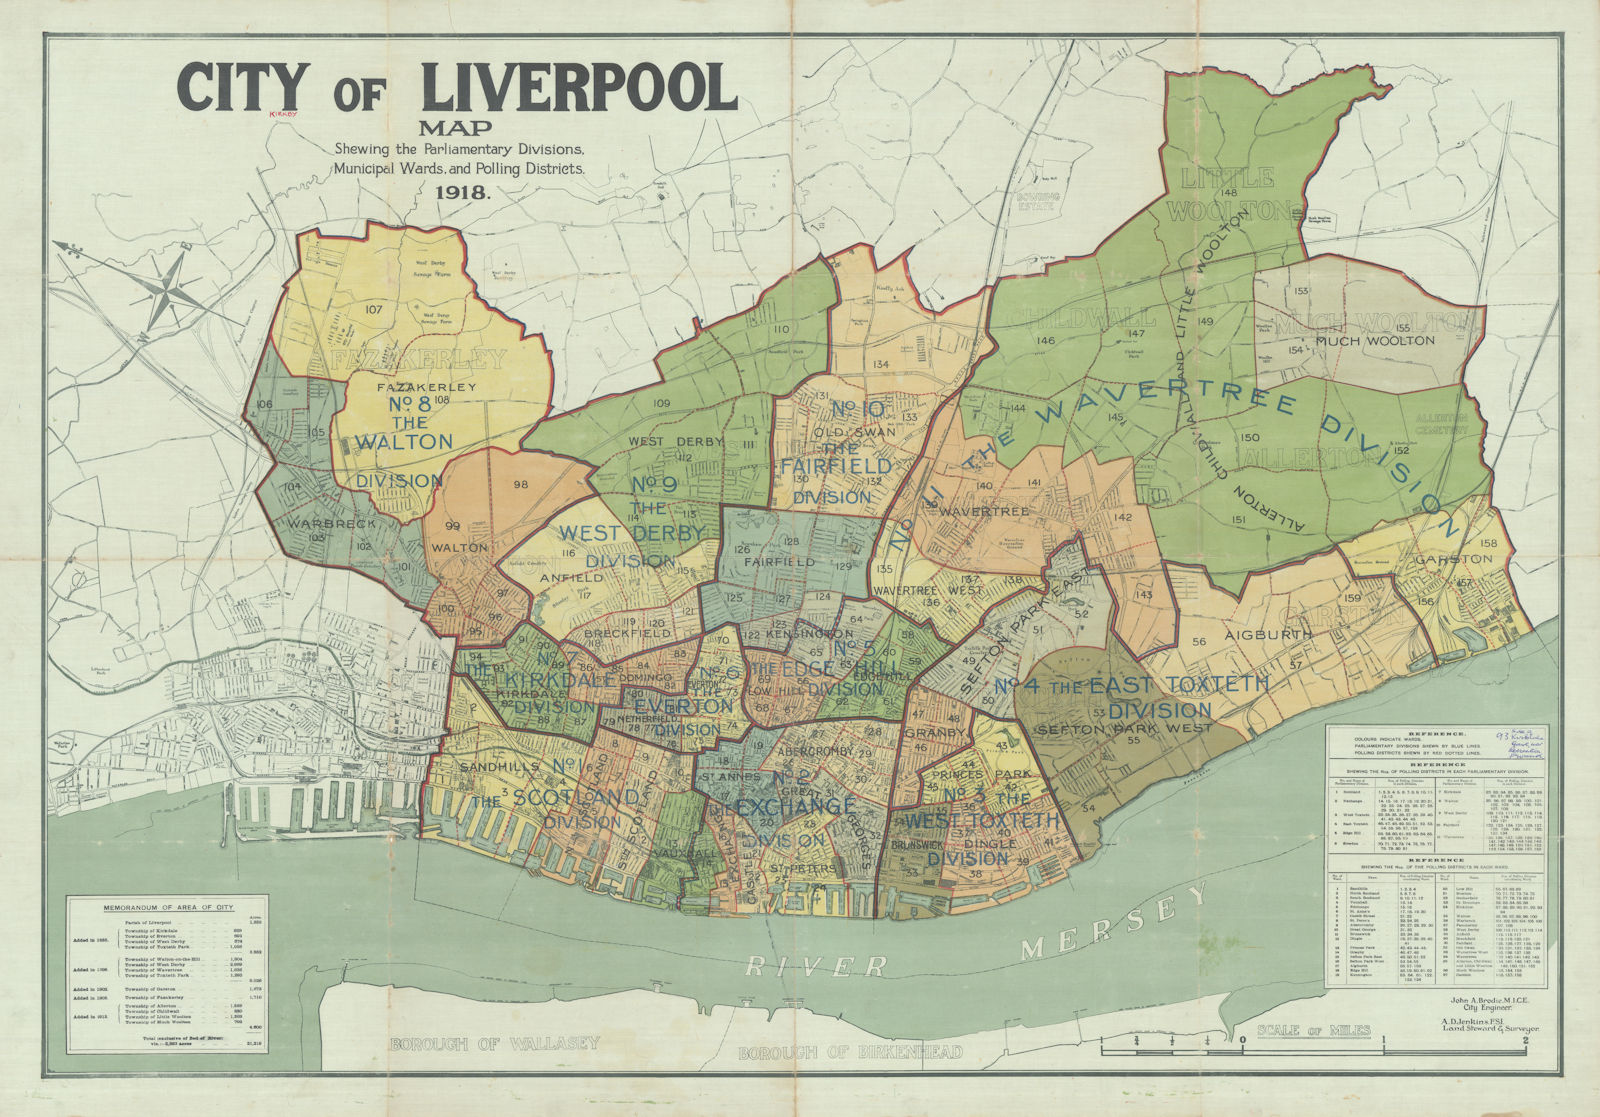 City of Liverpool. 80x114cm cloth map by John Brodie, City Engineer 1918